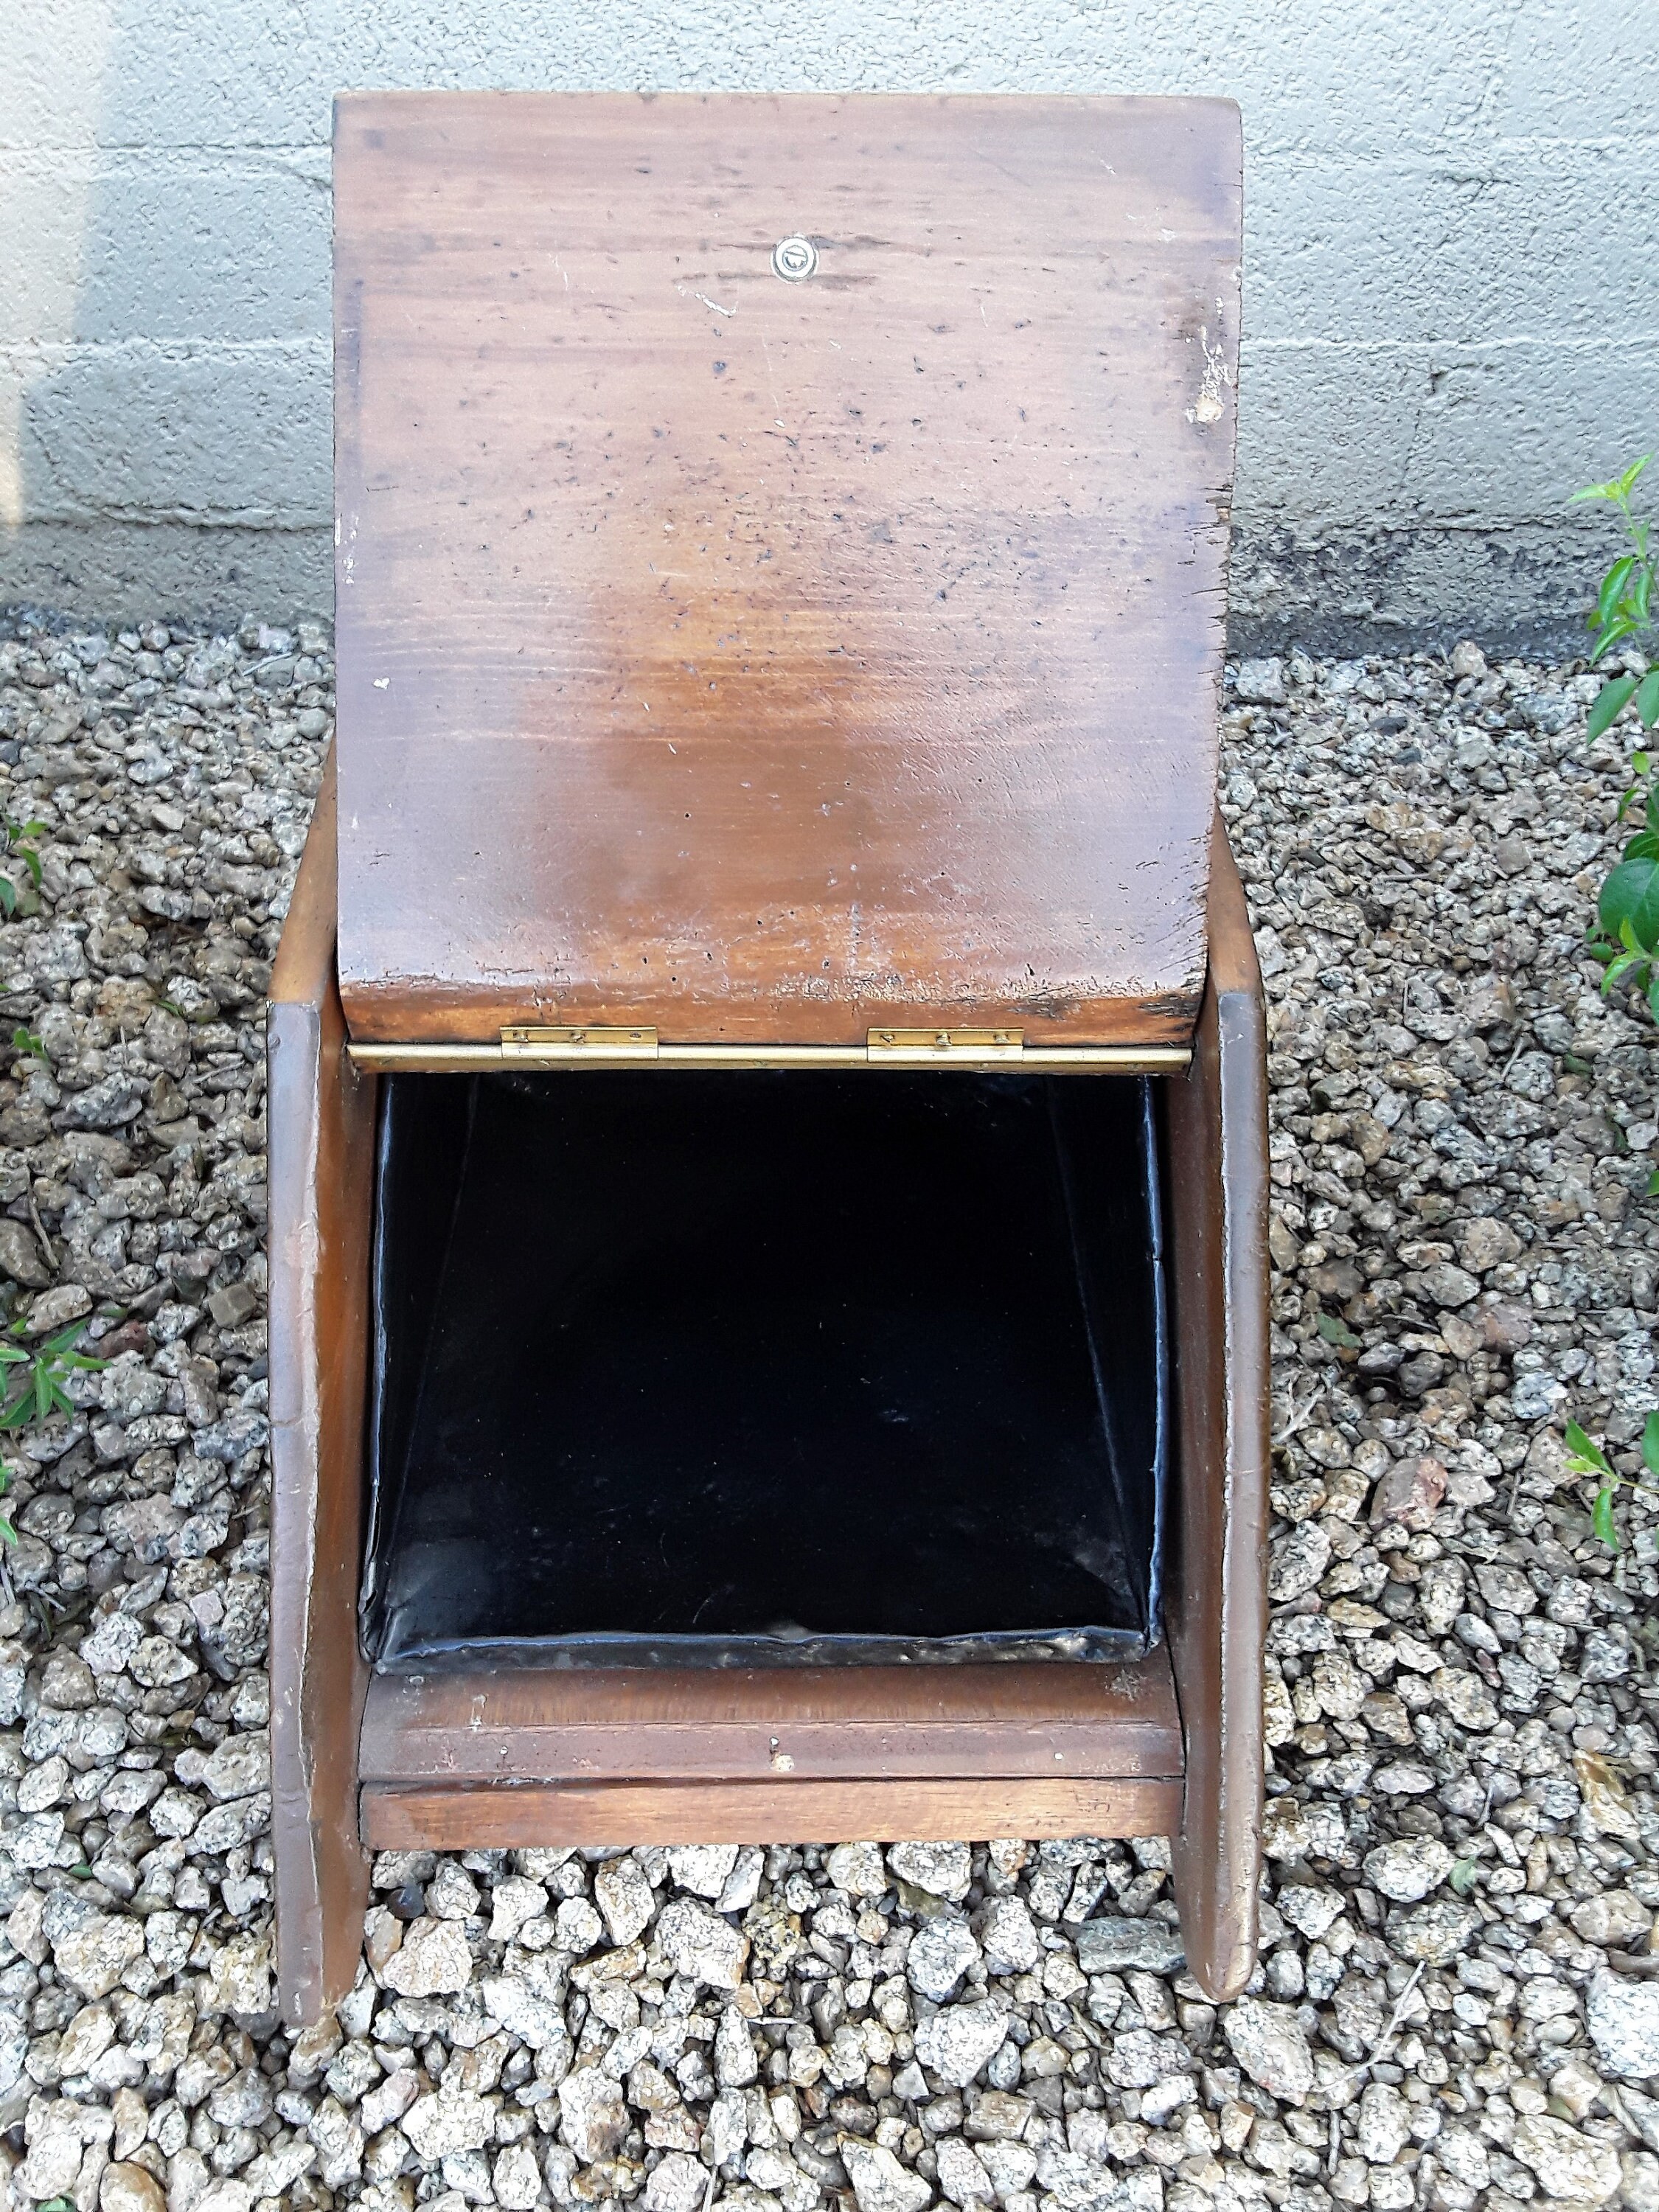 Coal Ash Scuttle Box Removable Metal Liner Bin  Wood Box Frame  Attached Scoop Shovel  Fireplace Wood Stove Decor  12 x 18  FREE SHIP